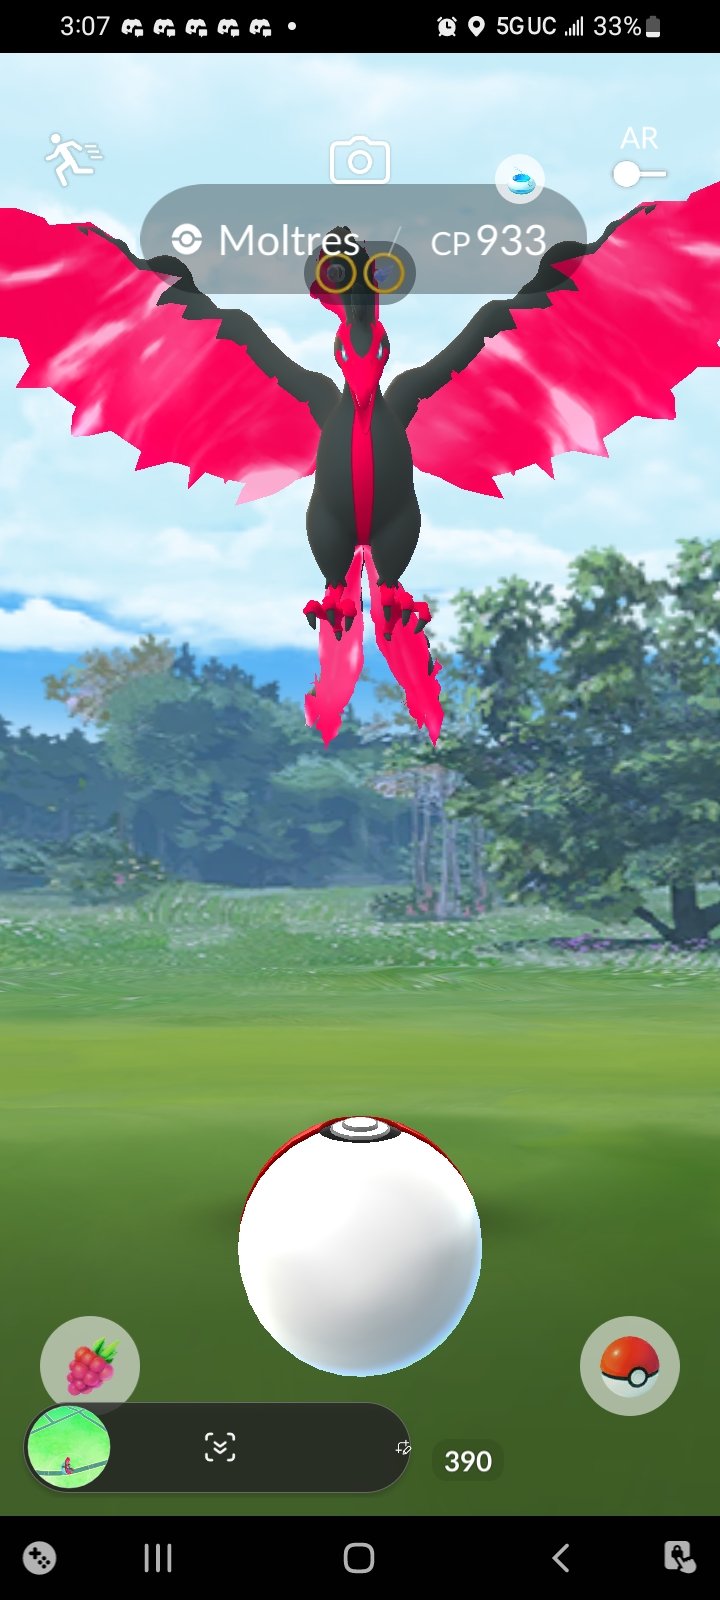 HOW TO REGISTER TO GET SHINY GALARIAN MOLTRES! #pokemon